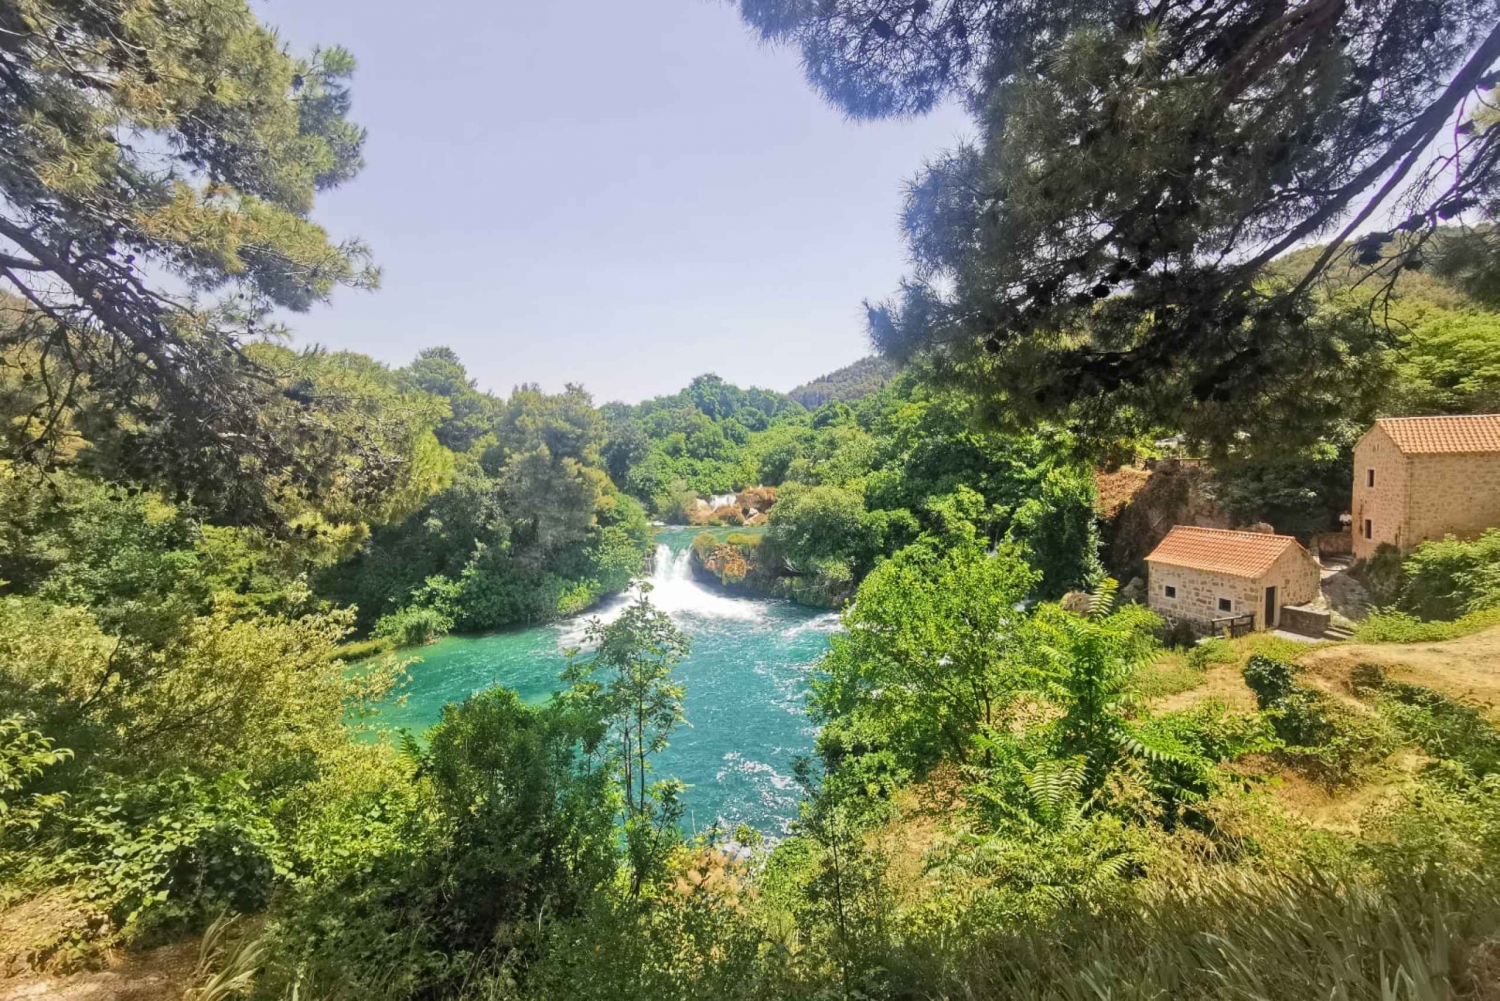 Krka waterfalls tour with lunch from Split